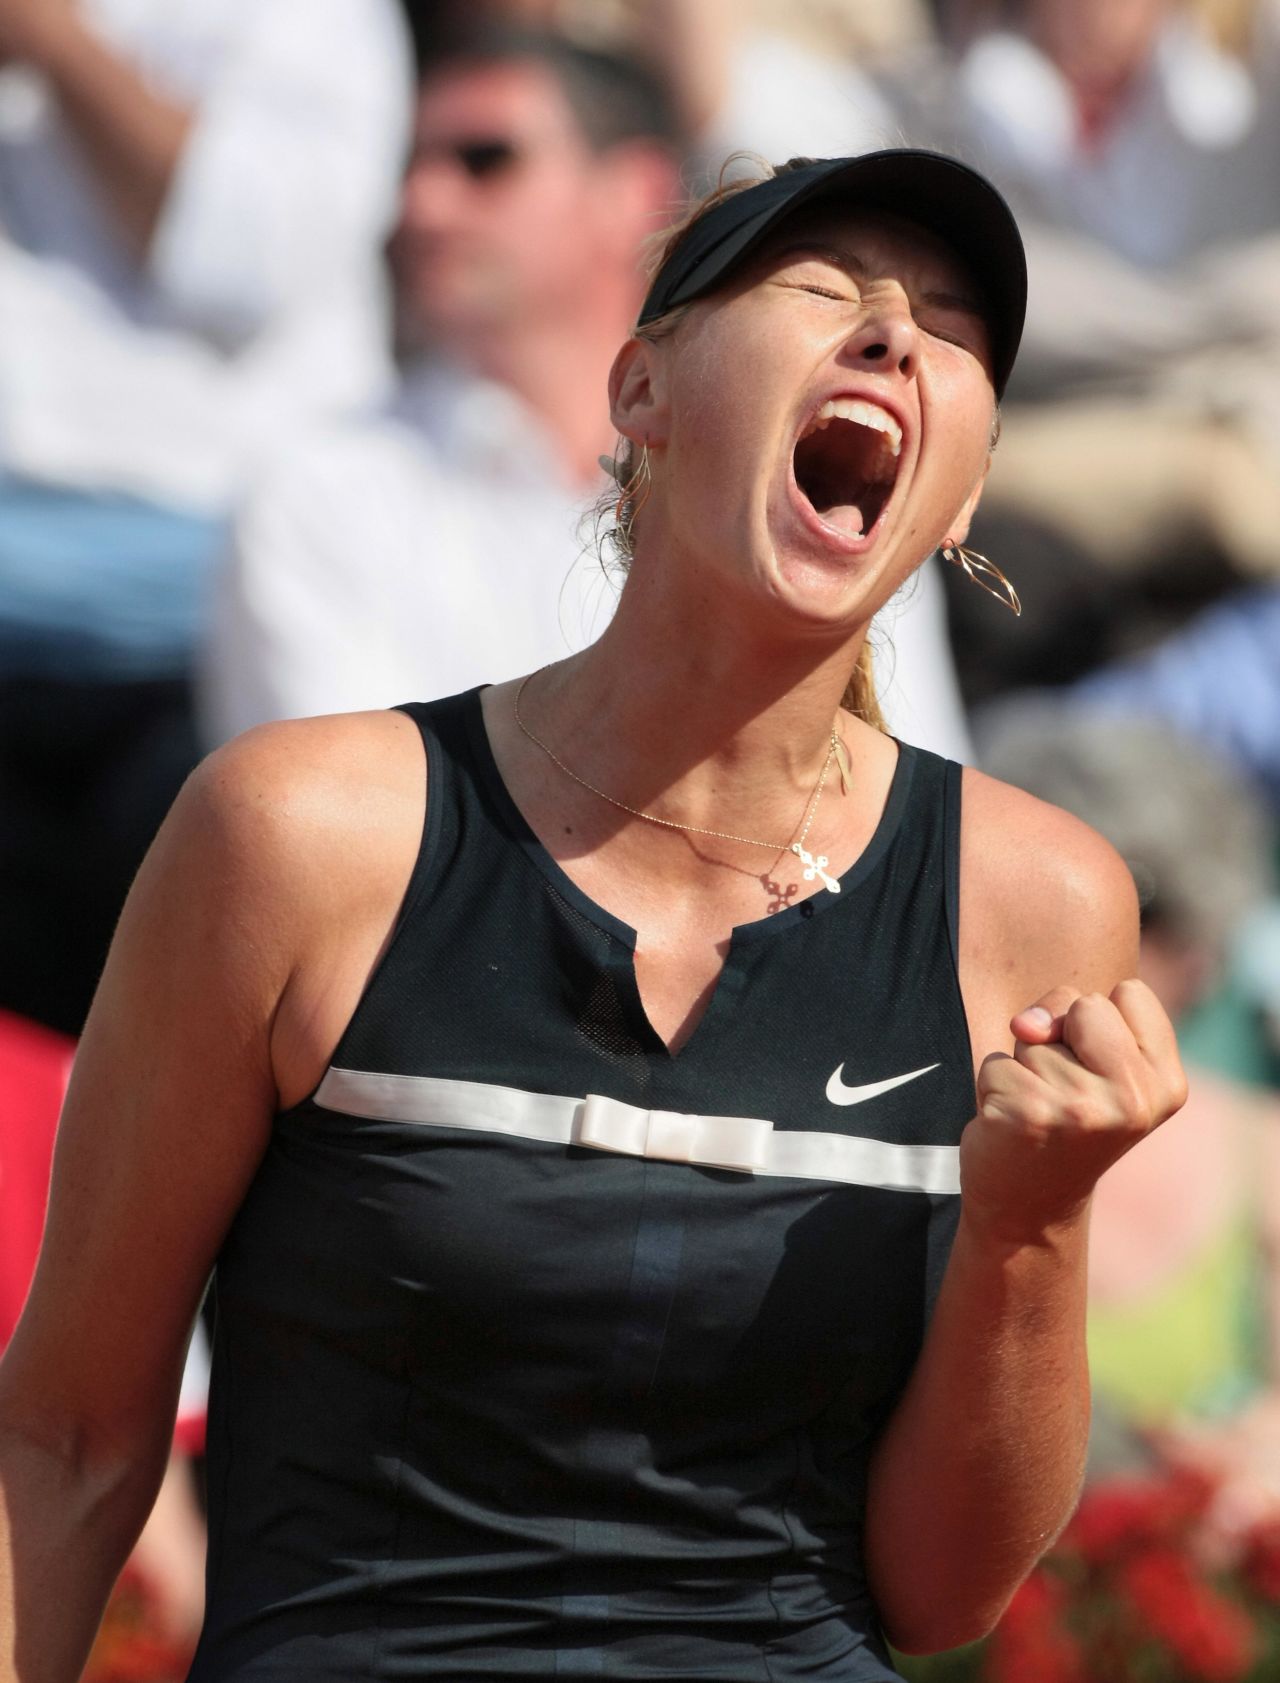 French Open champion Maria Sharapova is famous for her on-court shrieks. But at Roland Garros in 2008, the current world No. 1 aimed a verbal volley at the Paris crowd after being heckled during a clash with Dinara Safina.